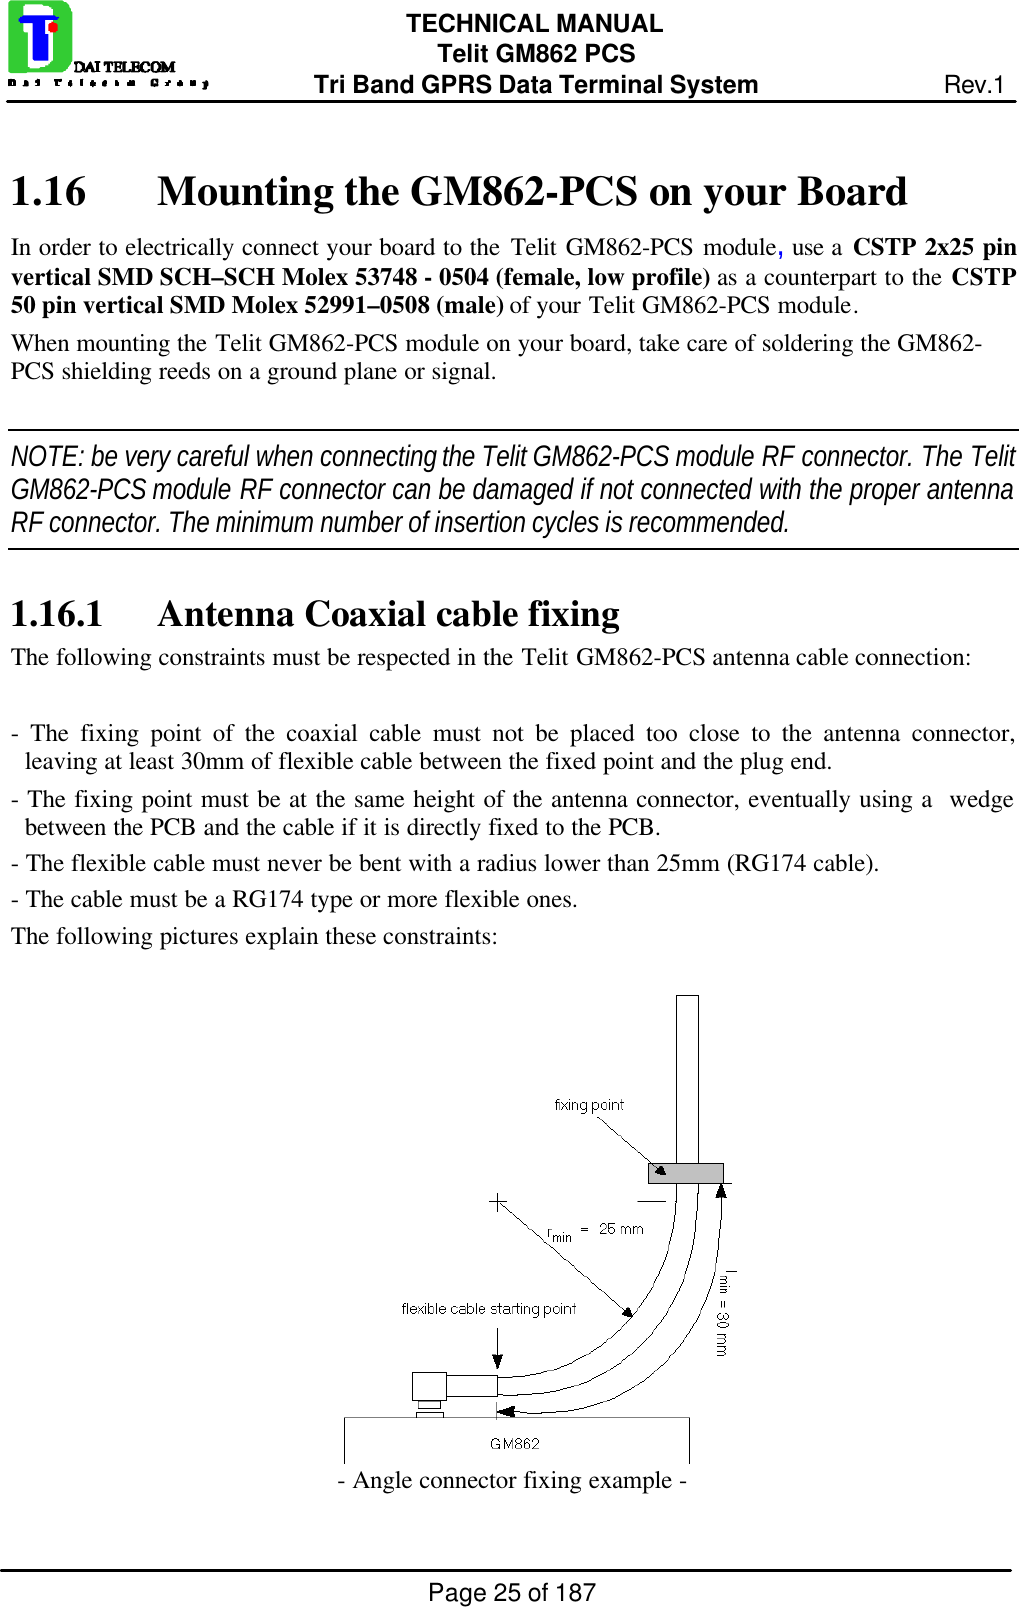 Page 25 of 187TECHNICAL MANUALTelit GM862 PCSTri Band GPRS Data Terminal System Rev.11.16 Mounting the GM862-PCS on your BoardIn order to electrically connect your board to the Telit GM862-PCS module, use a CSTP 2x25 pinvertical SMD SCH–SCH Molex 53748 - 0504 (female, low profile) as a counterpart to the CSTP50 pin vertical SMD Molex 52991–0508 (male) of your Telit GM862-PCS module.When mounting the Telit GM862-PCS module on your board, take care of soldering the GM862-PCS shielding reeds on a ground plane or signal.NOTE: be very careful when connecting the Telit GM862-PCS module RF connector. The TelitGM862-PCS module RF connector can be damaged if not connected with the proper antennaRF connector. The minimum number of insertion cycles is recommended.1.16.1 Antenna Coaxial cable fixingThe following constraints must be respected in the Telit GM862-PCS antenna cable connection:- The fixing point of the coaxial cable must not be placed too close to the antenna connector,leaving at least 30mm of flexible cable between the fixed point and the plug end.- The fixing point must be at the same height of the antenna connector, eventually using a  wedgebetween the PCB and the cable if it is directly fixed to the PCB.- The flexible cable must never be bent with a radius lower than 25mm (RG174 cable).- The cable must be a RG174 type or more flexible ones.The following pictures explain these constraints:- Angle connector fixing example -